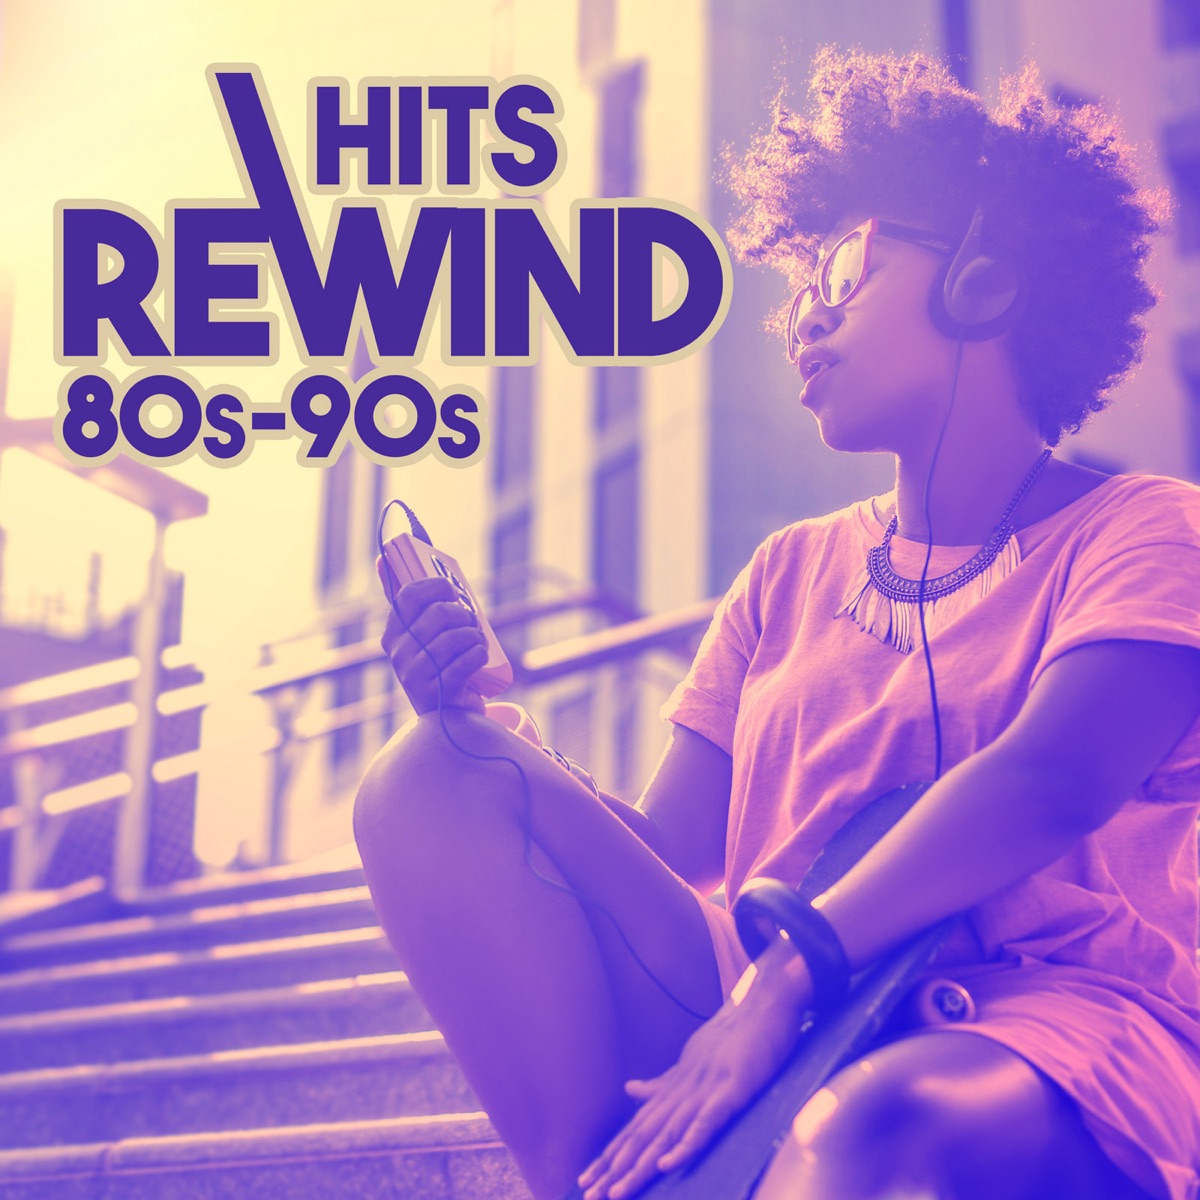 Hits Rewind 80s-90s - Album by Various Artists - Apple Music